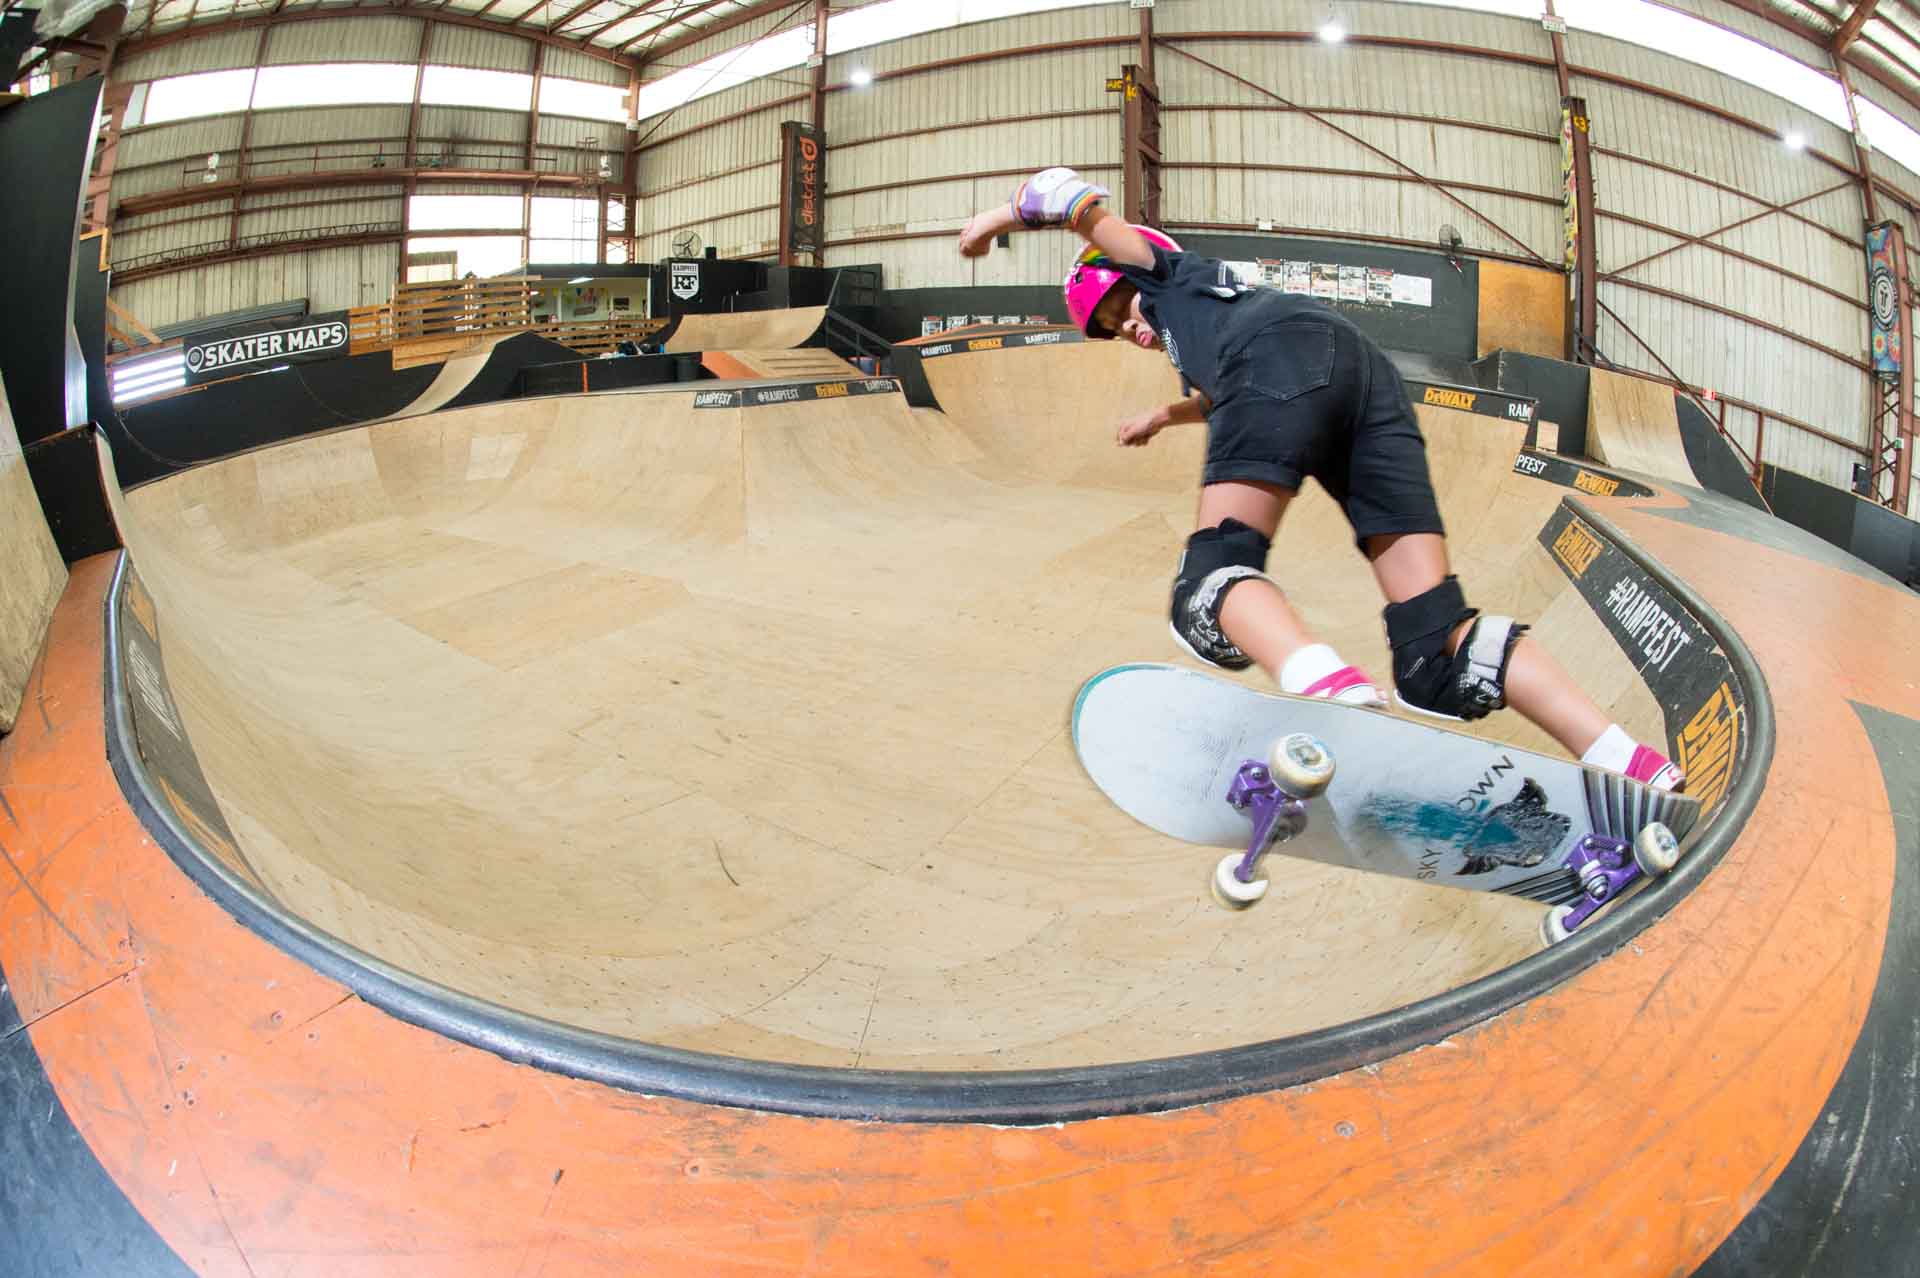 Young female skateboarder learns coping trick at Rampfest indoor skatepark